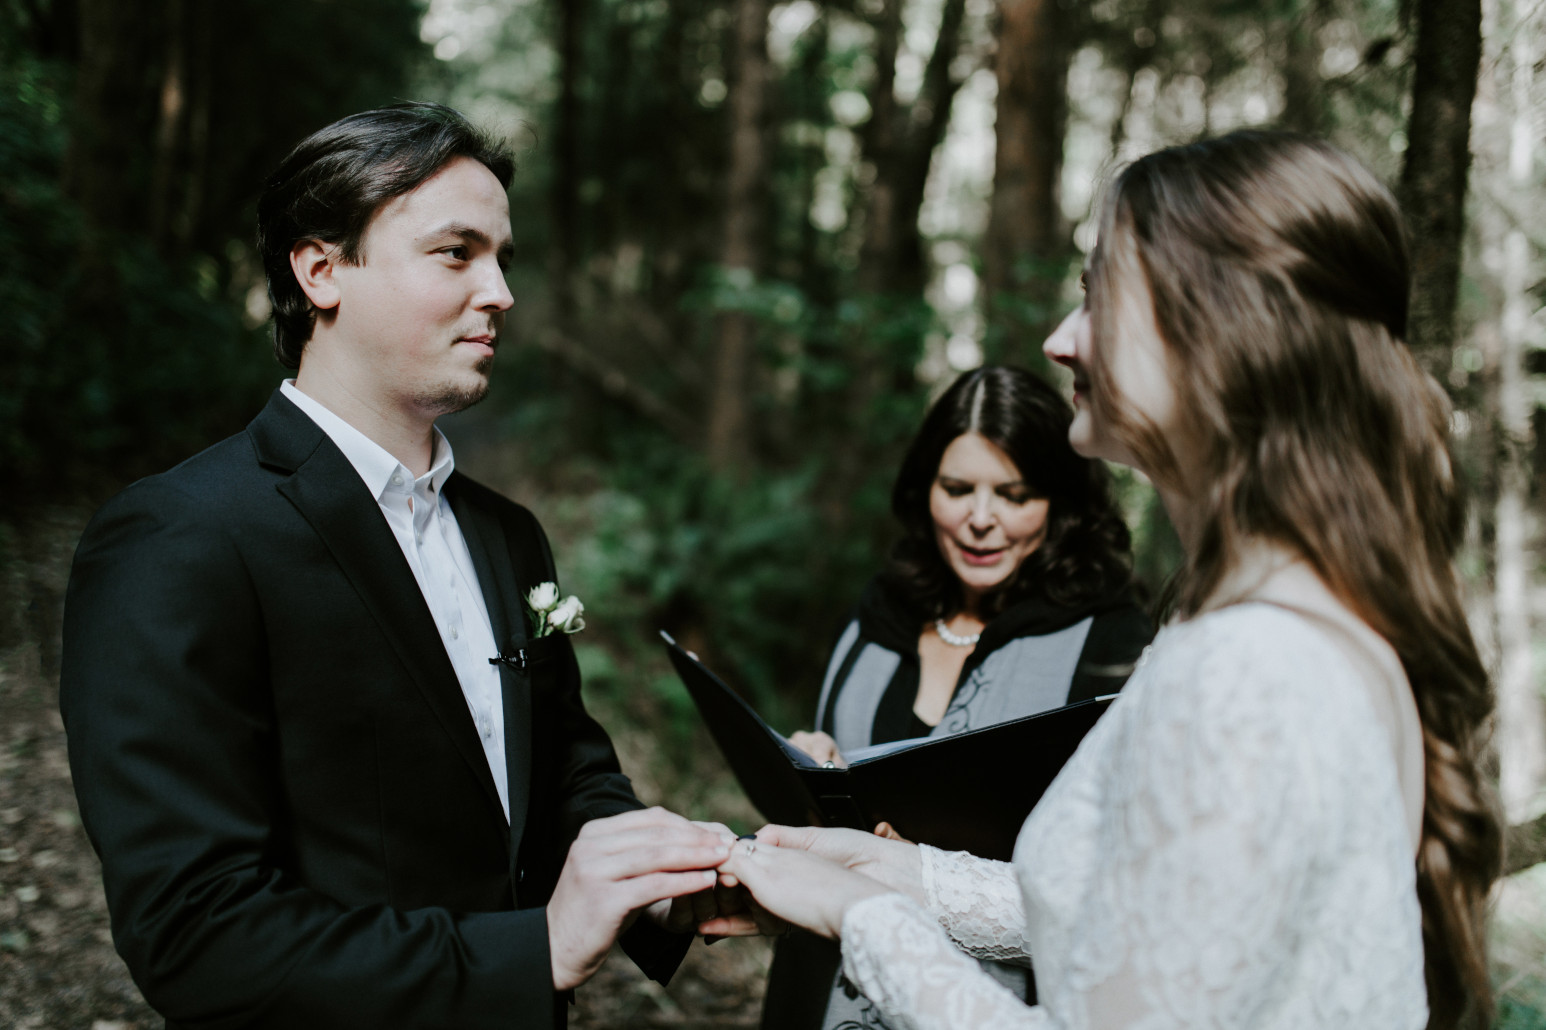 Vlad places a ring on Nicole's finger. Elopement wedding photography at Cannon Beach by Sienna Plus Josh.